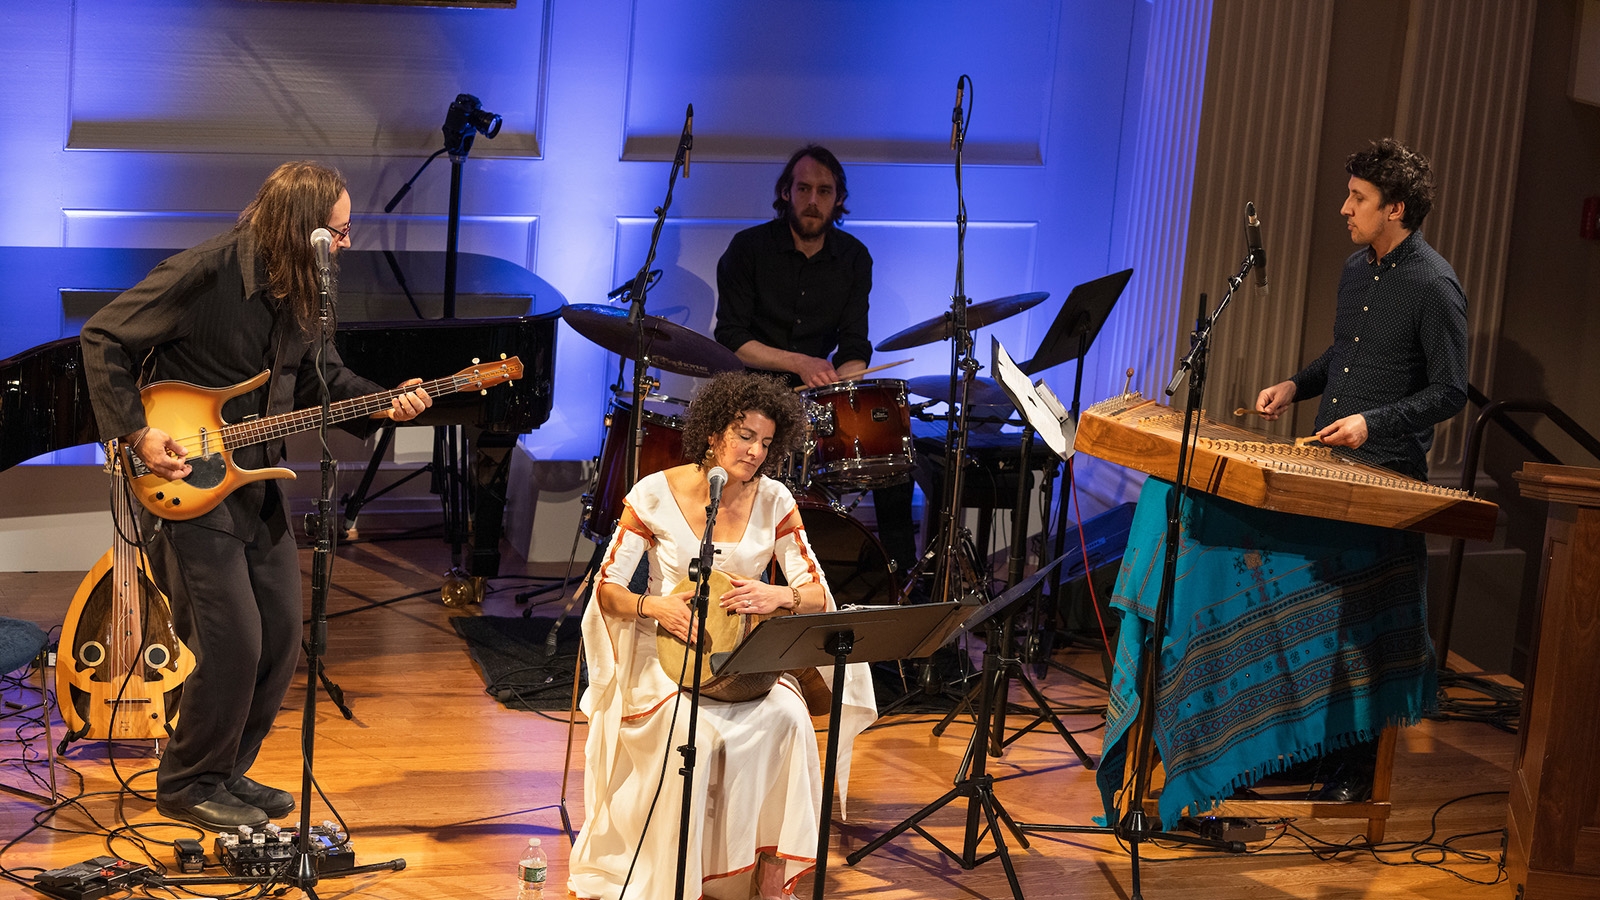 Galeet Dardashti and musicians playing instruments and performing. 